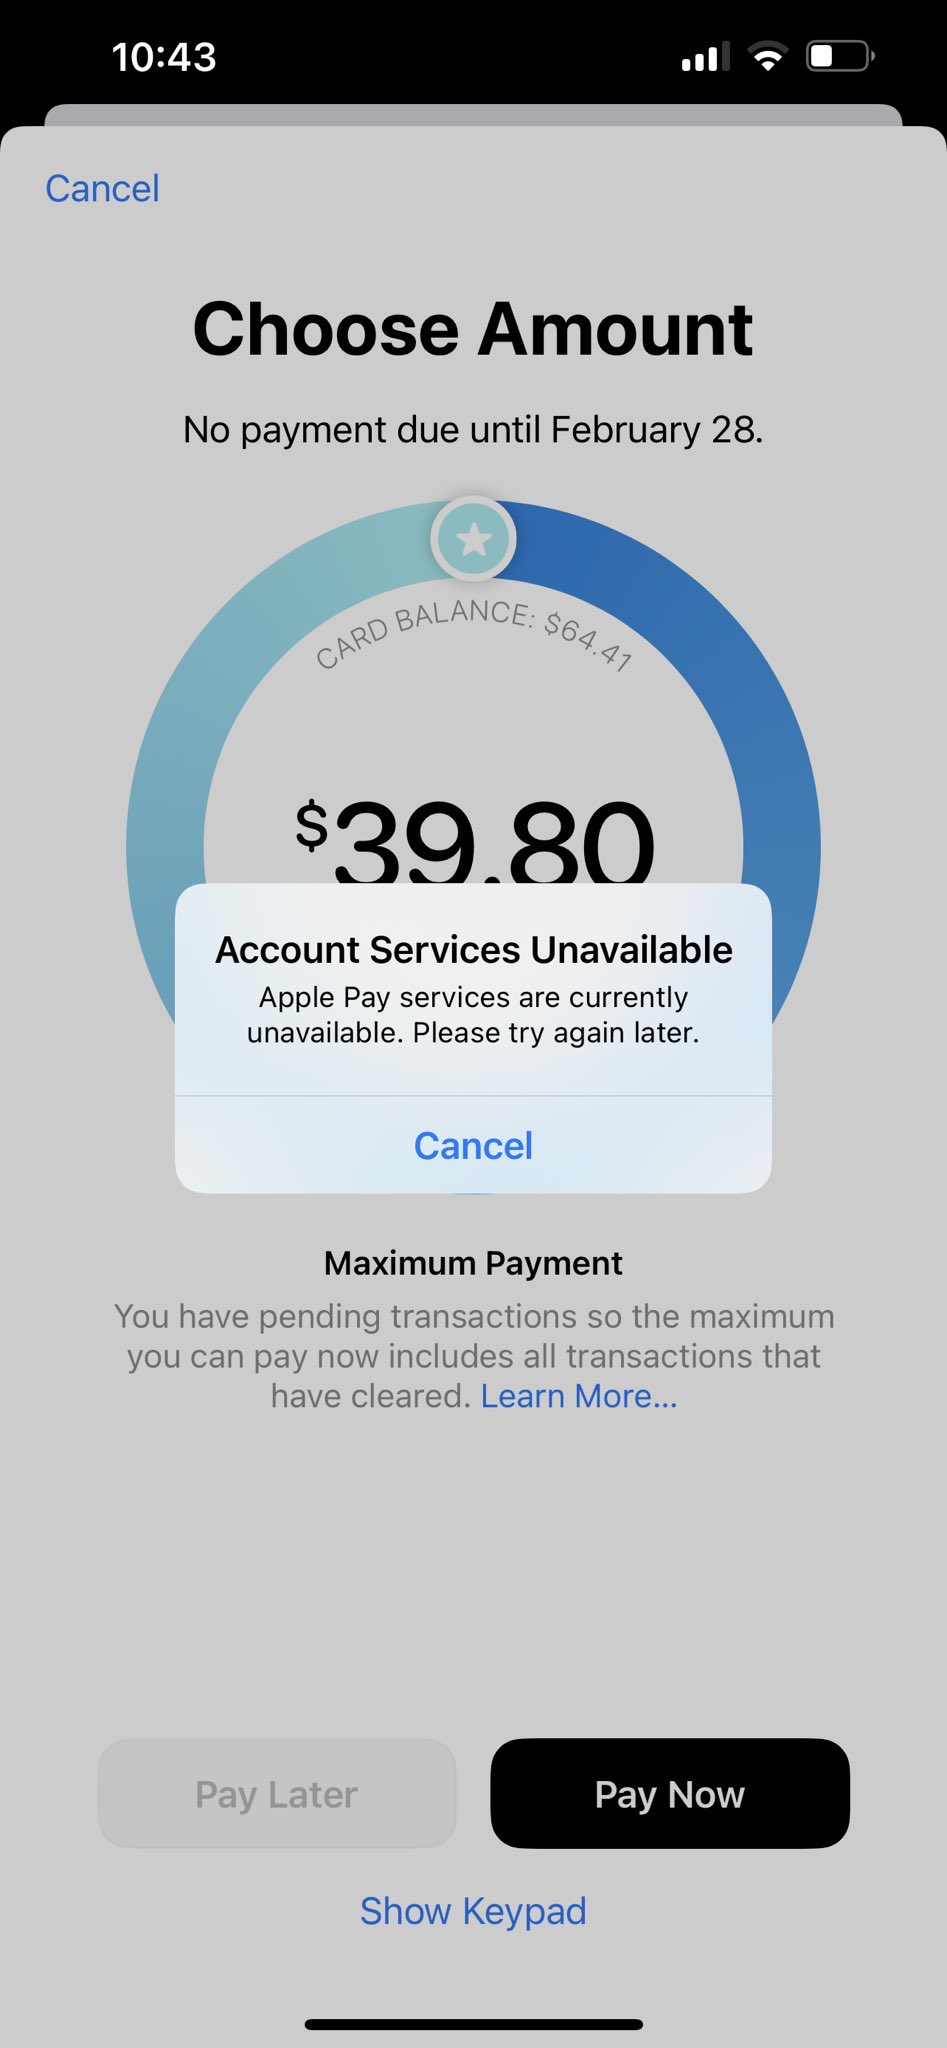 Some iPhone Users Experiencing Issues With Apple Card Payments [Resolved] - MacRumors